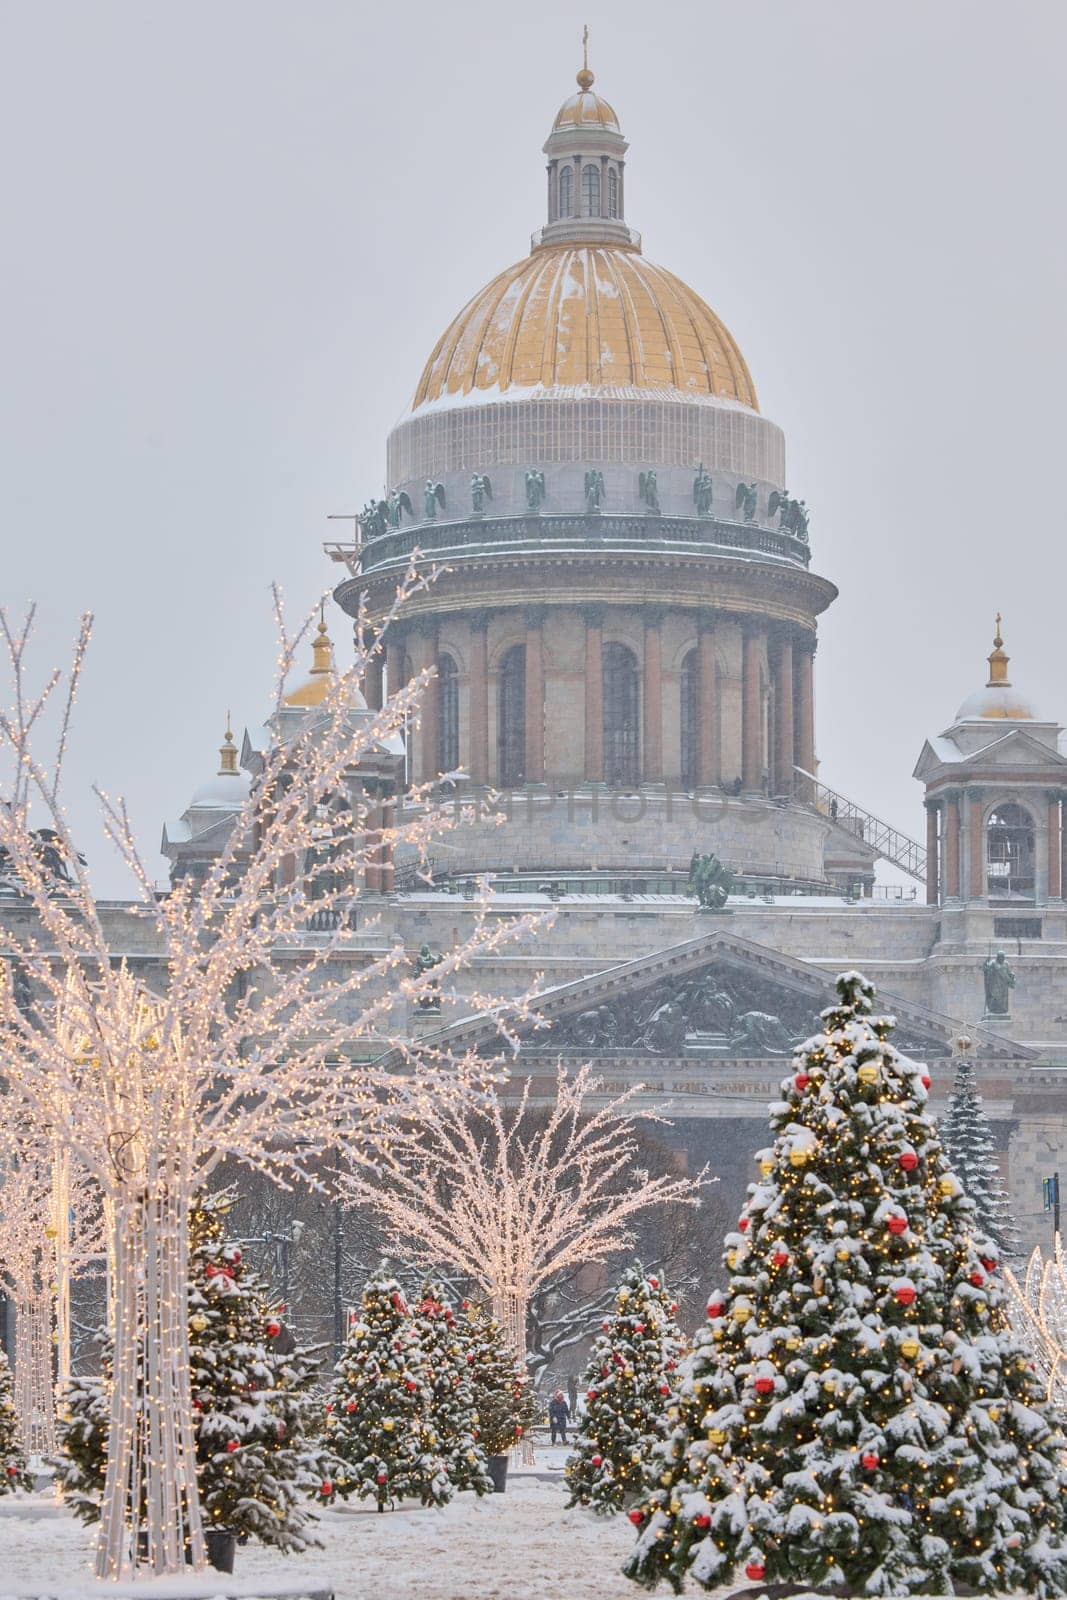 Russia, St Petersburg, St. Isaac's Cathedral and the monument to Emperor Nicholas II through lighting decorations during snowstorm, streets decorated for Christmas. High quality photo